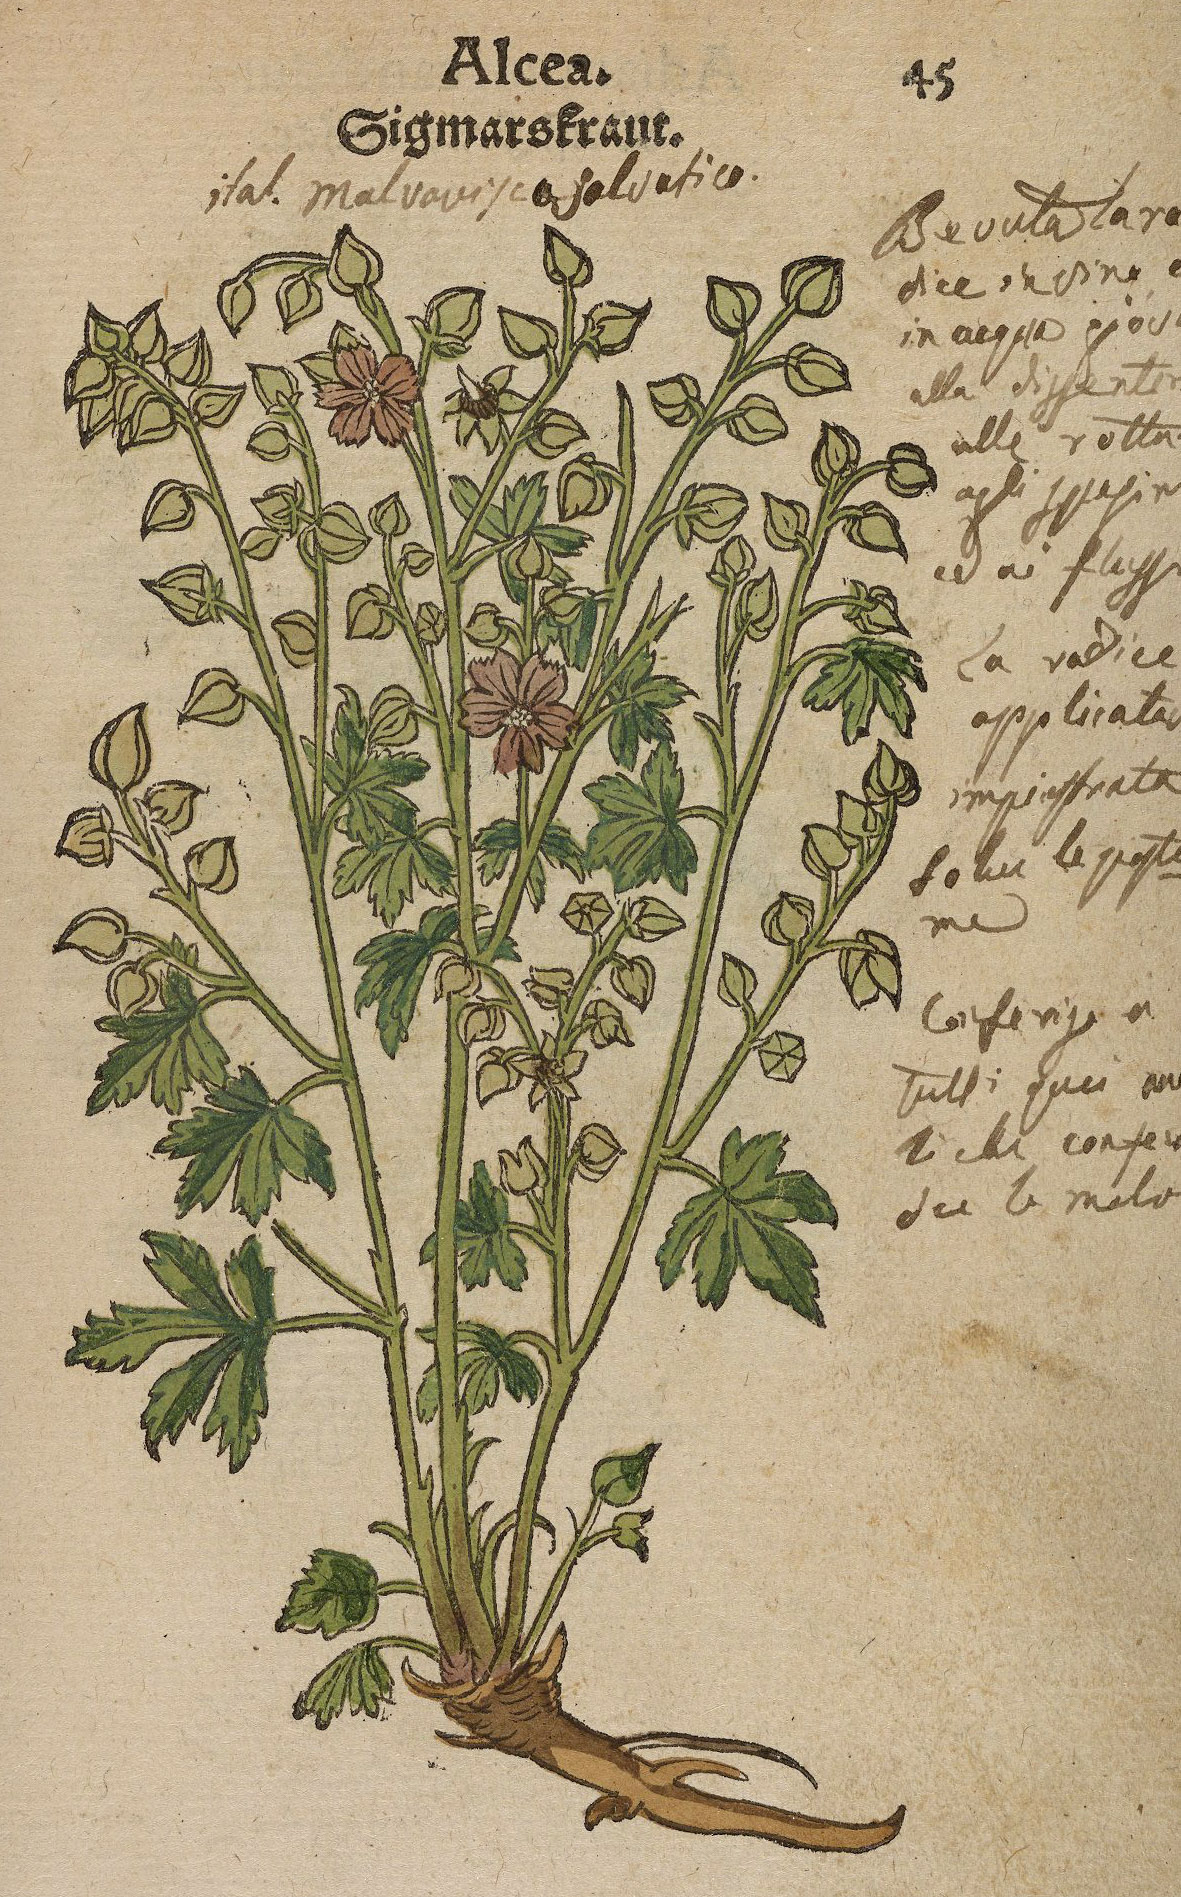 Printed and hand-colored image of Hollyhock ("Alcea"), with manuscript marginalia